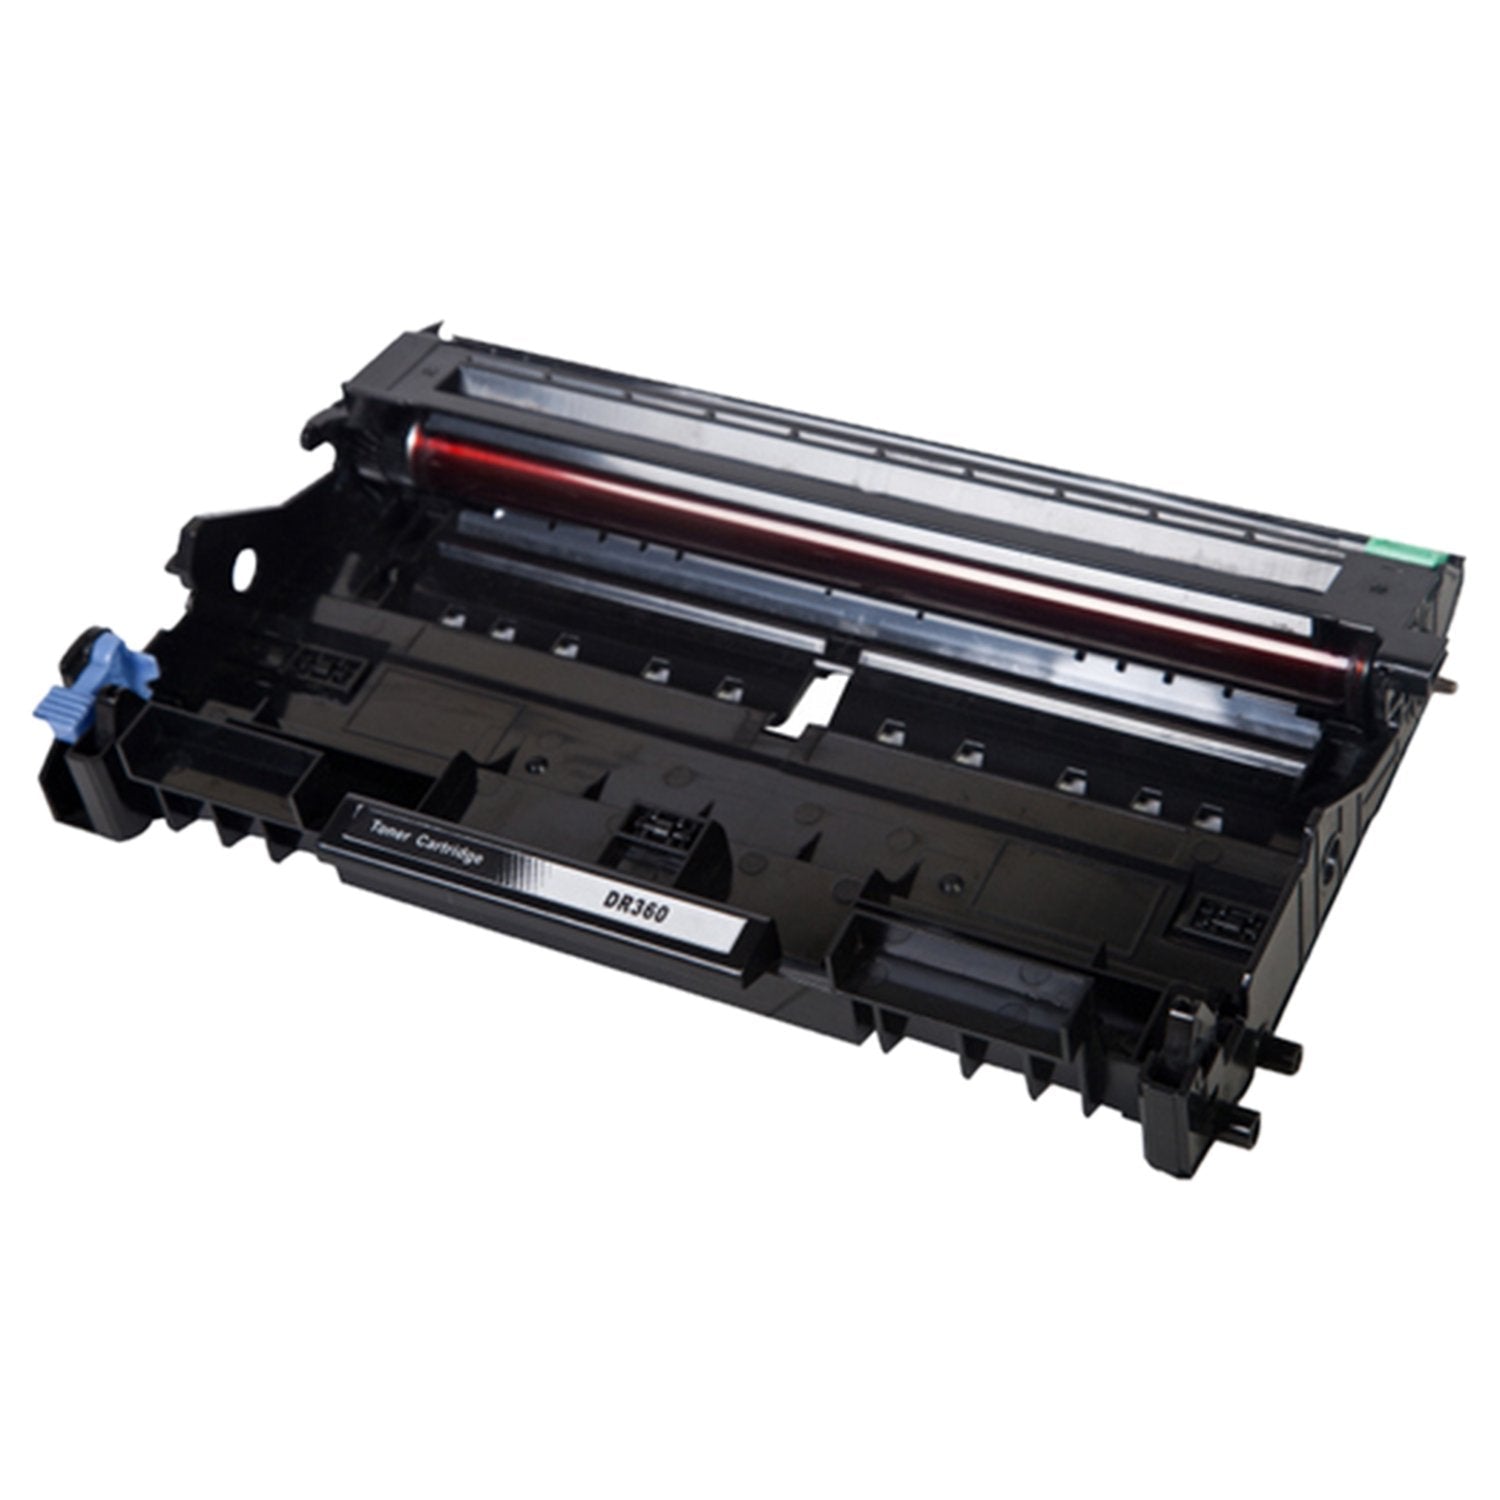 Absolute Toner Compatible Brother DR360 Black Drum Unit Toner Cartridge | Absolute Toner Brother Toner Cartridges